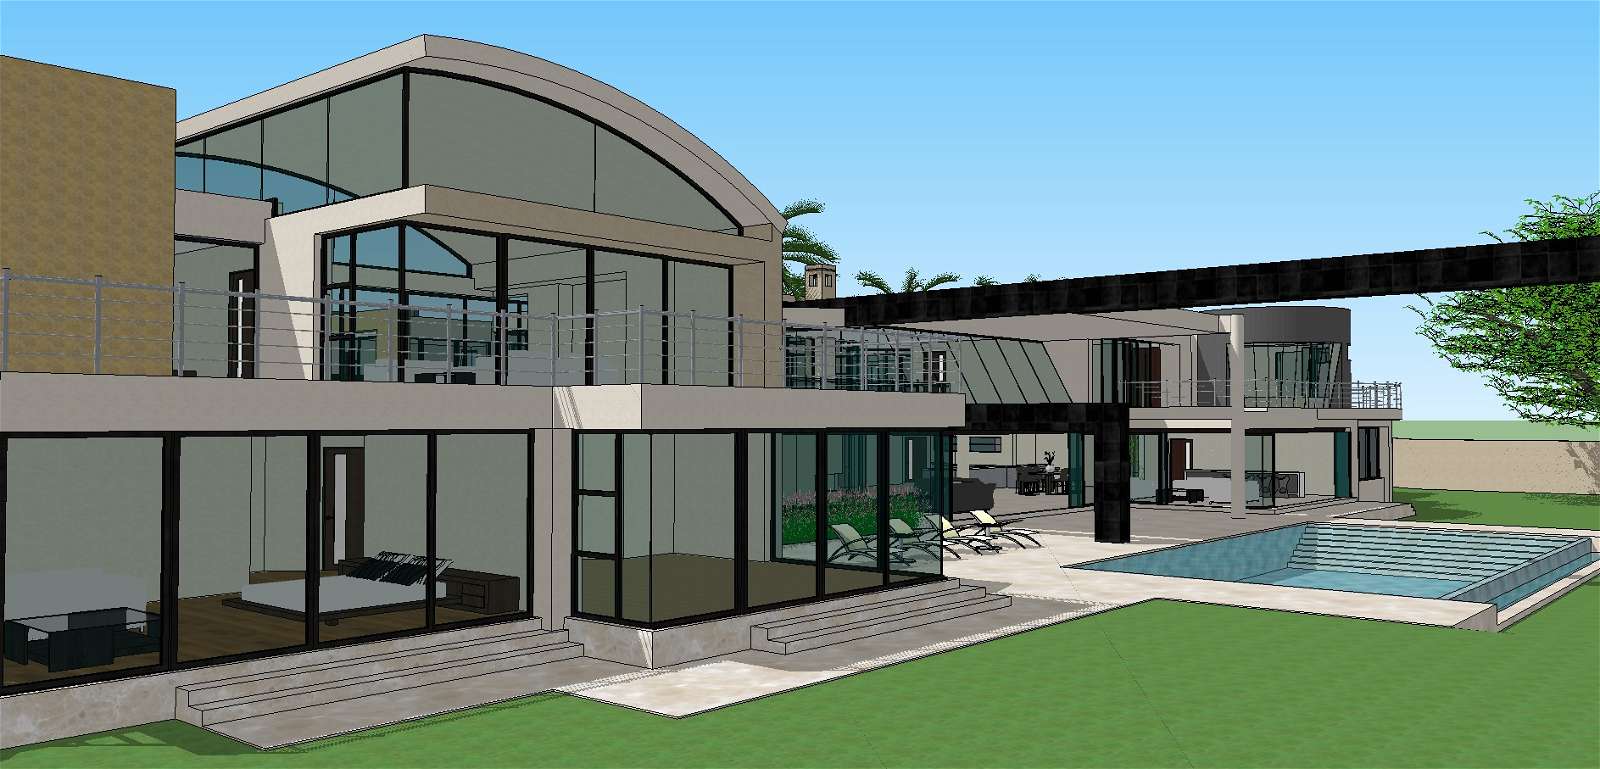 Sketchup file of house design in 3d - Cadbull